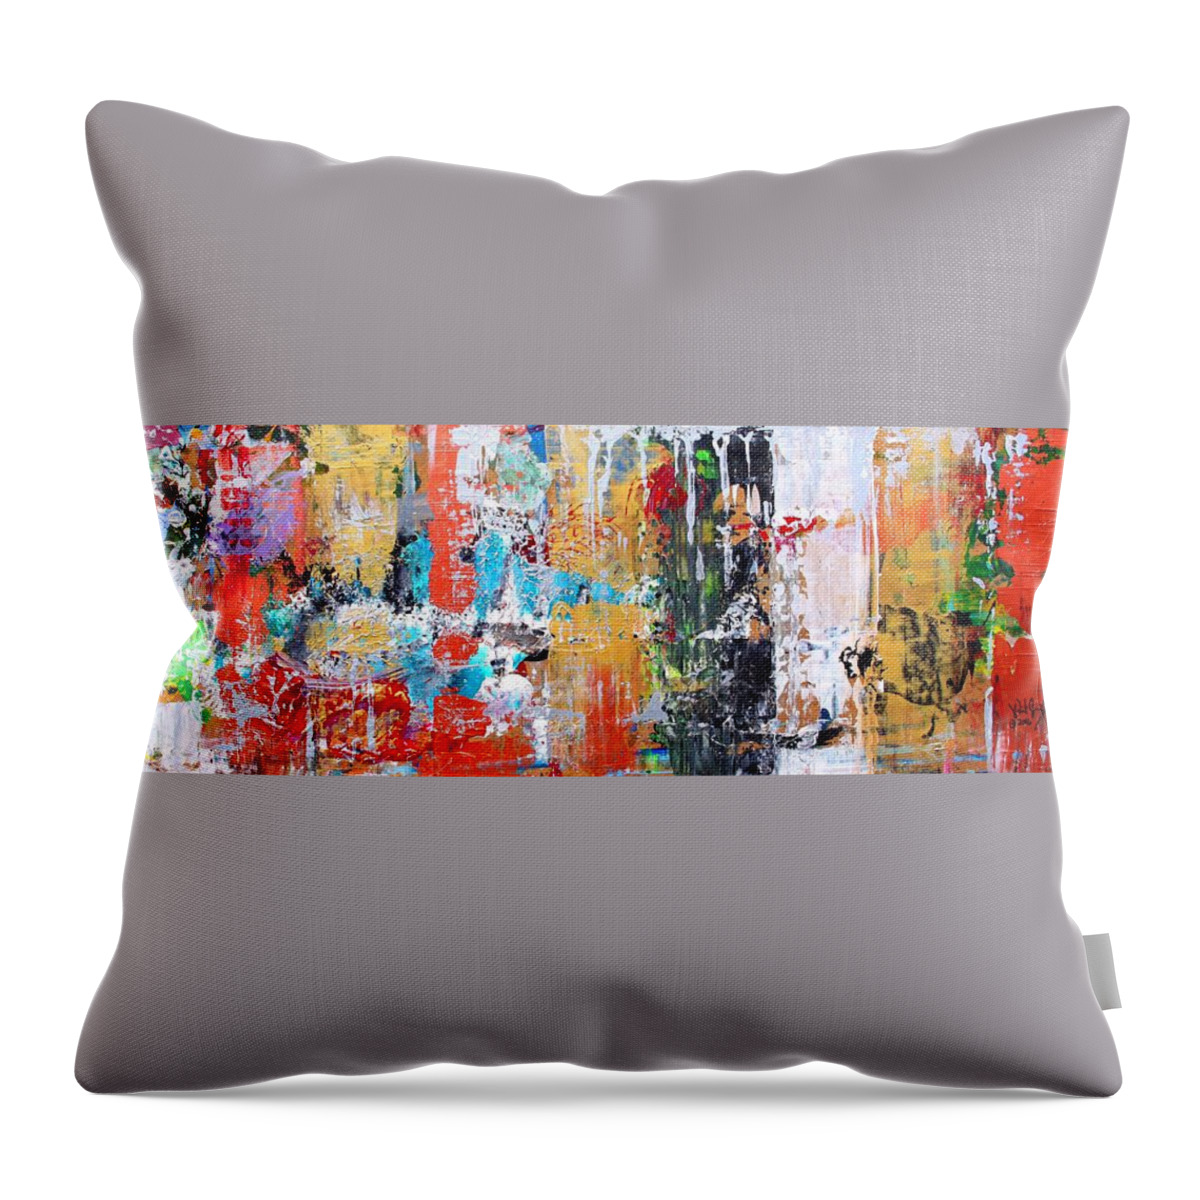 Abstract Throw Pillow featuring the painting Metallic Winter by J Vincent Scarpace